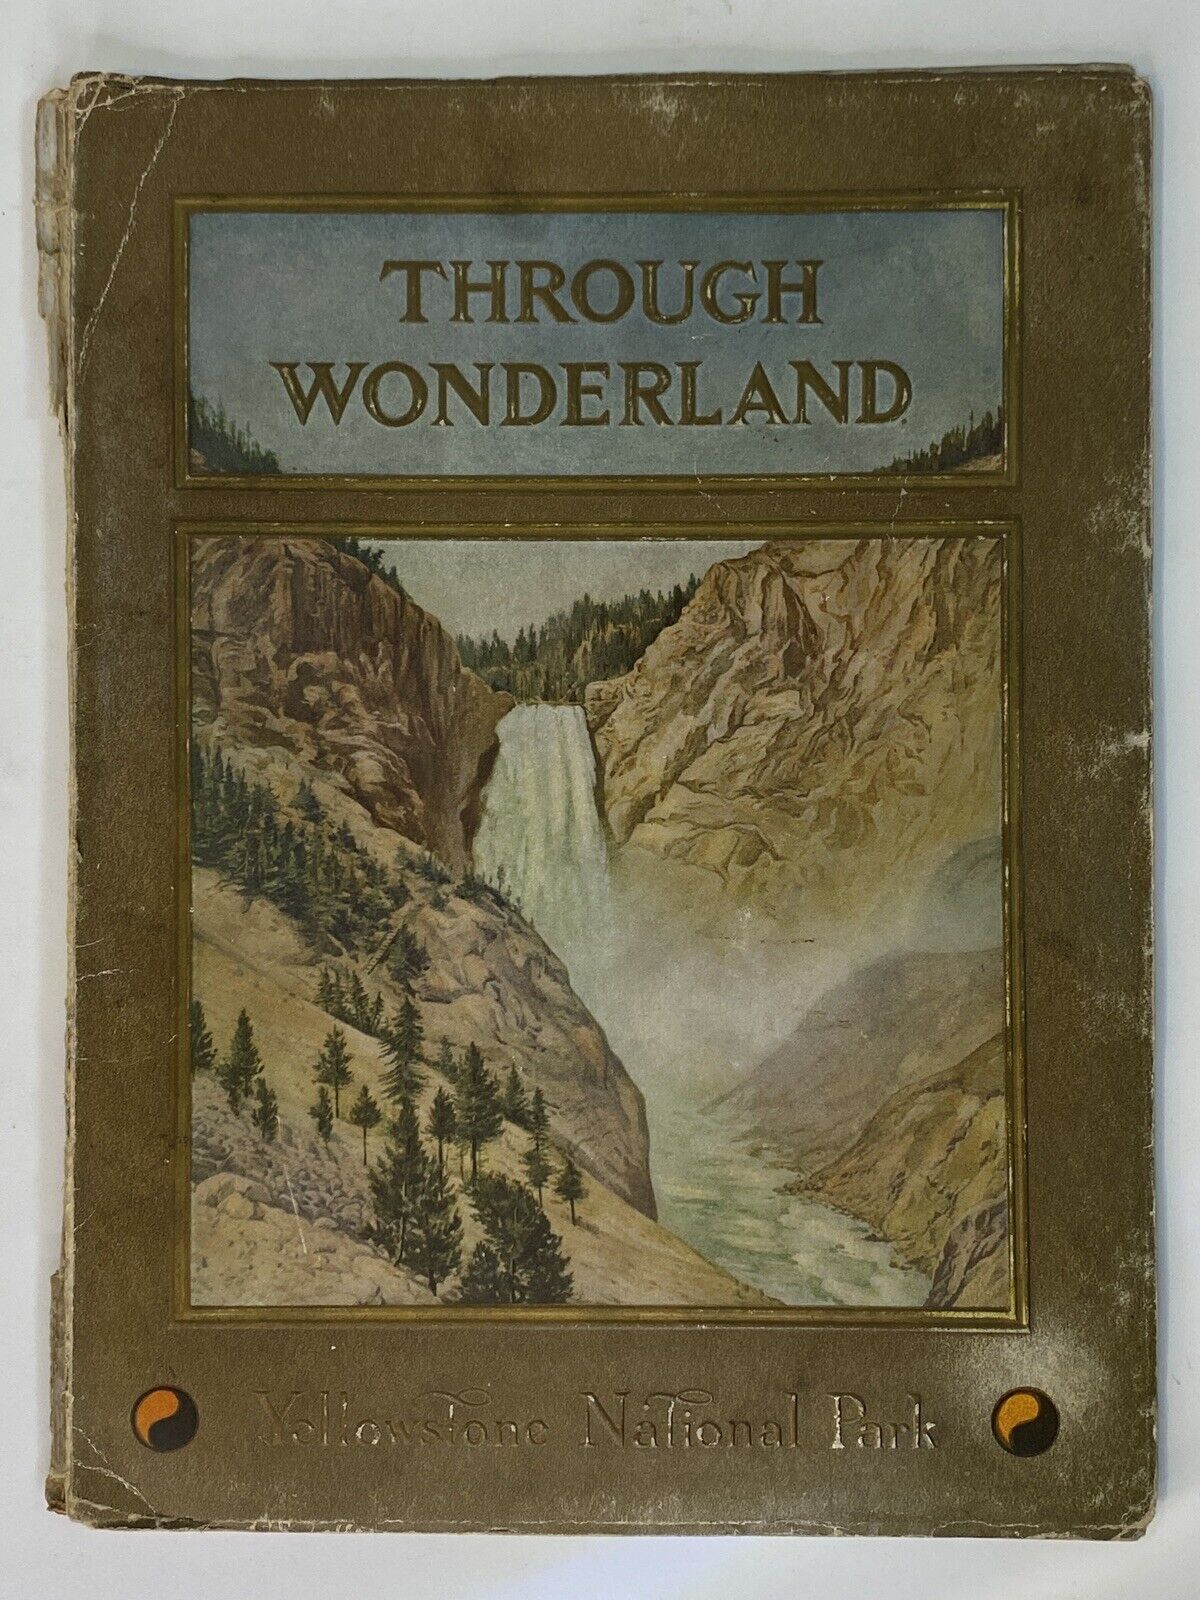 1910 Through Wonderland Yellowstone National Park Guidebook Northern Pacific RR